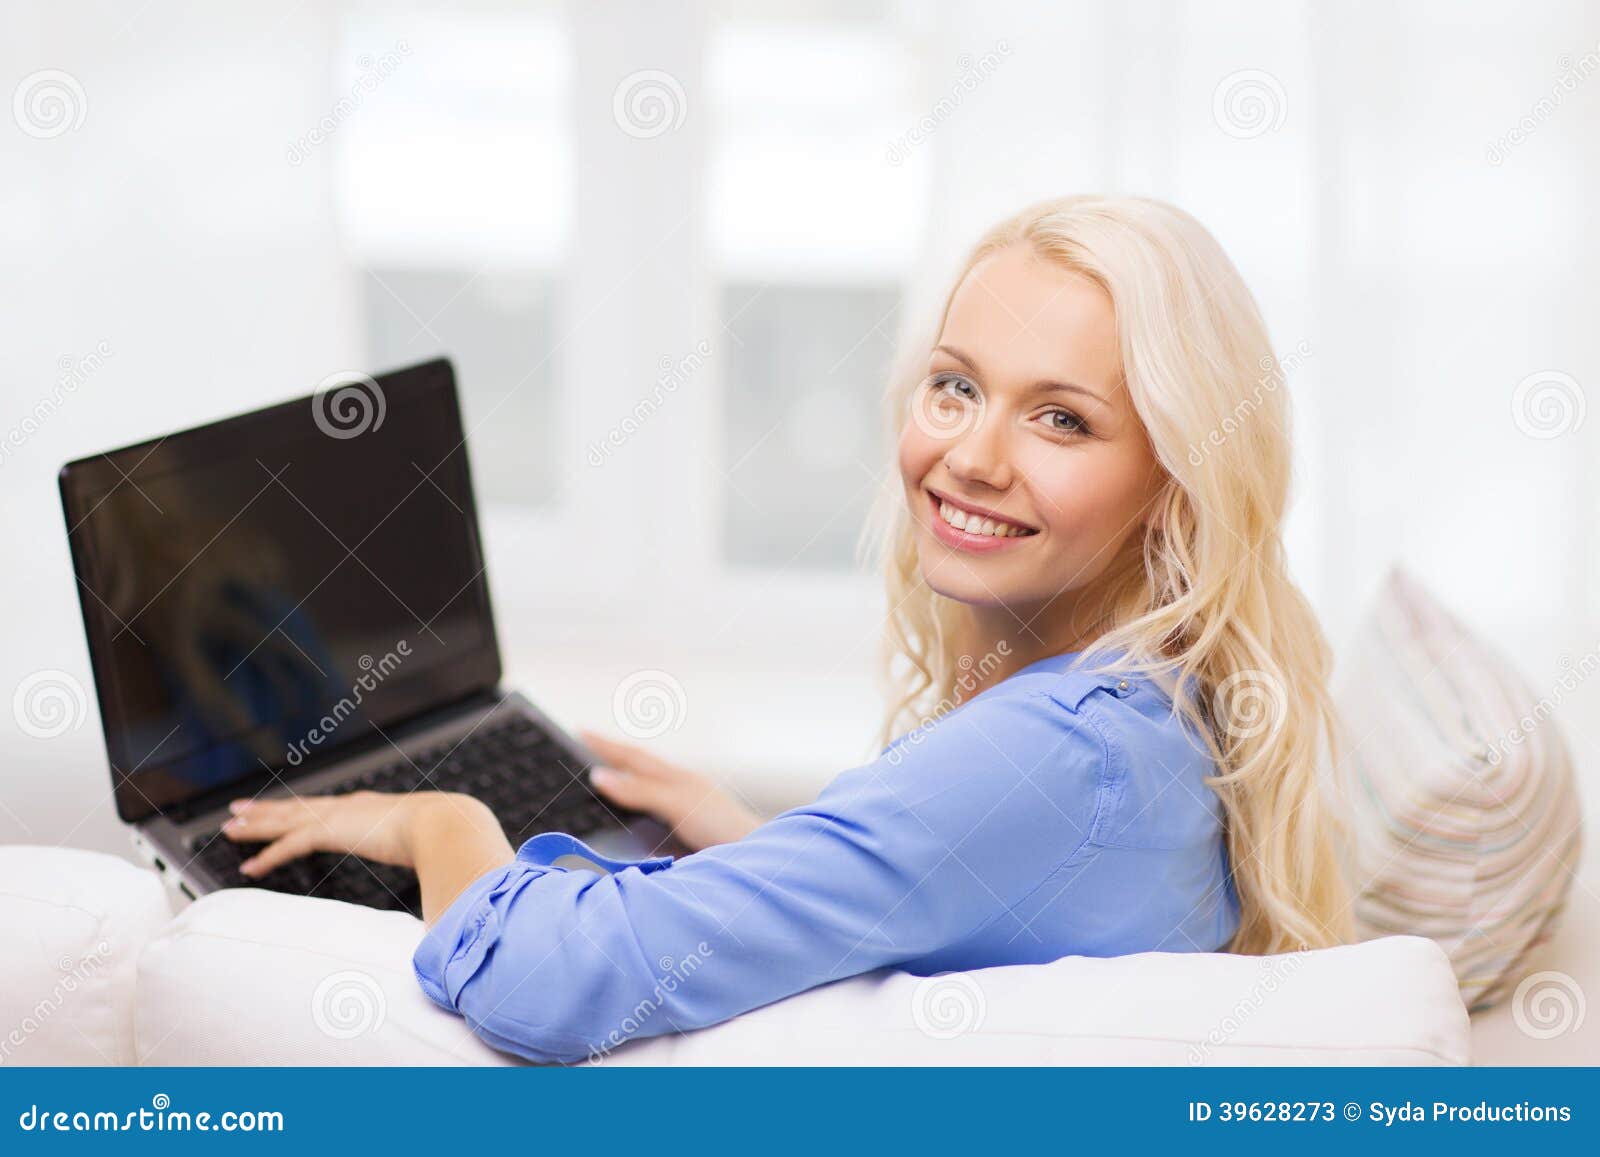 Smiling Woman with Laptop Computer at Home Stock Image - Image of adult ...